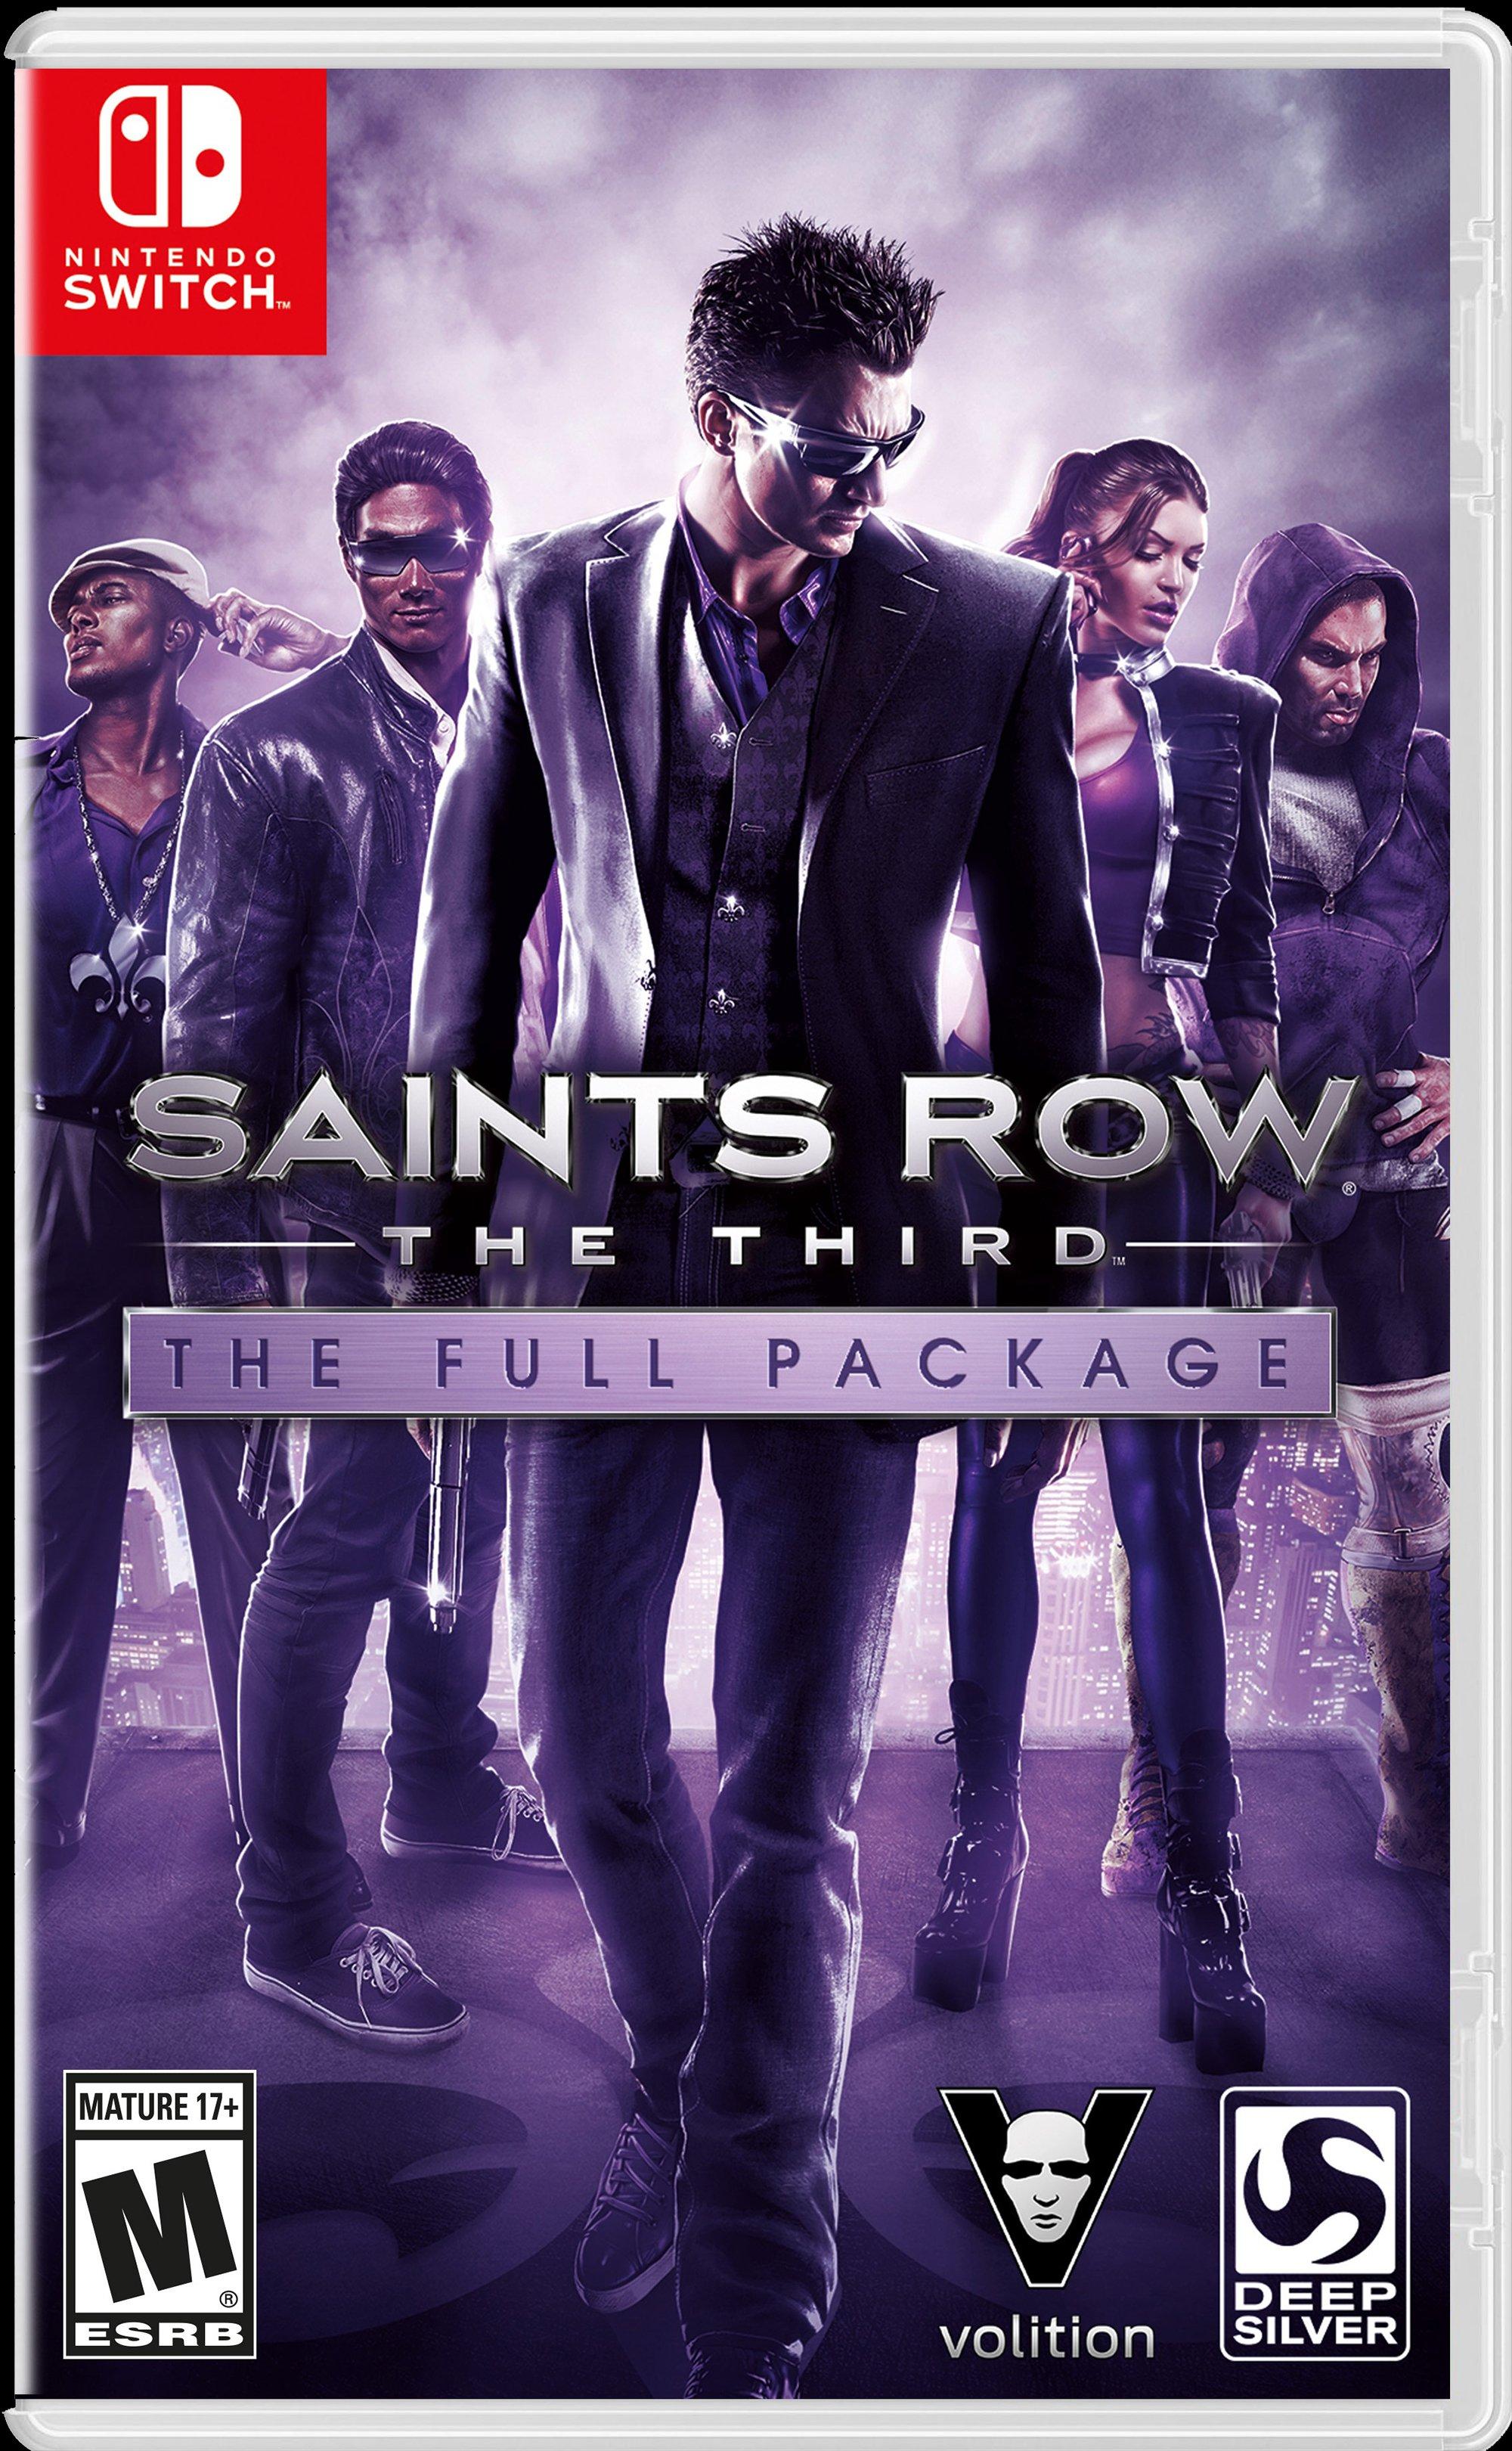 Contribution Against board Saints Row: The Third The Full Package - Nintendo Switch